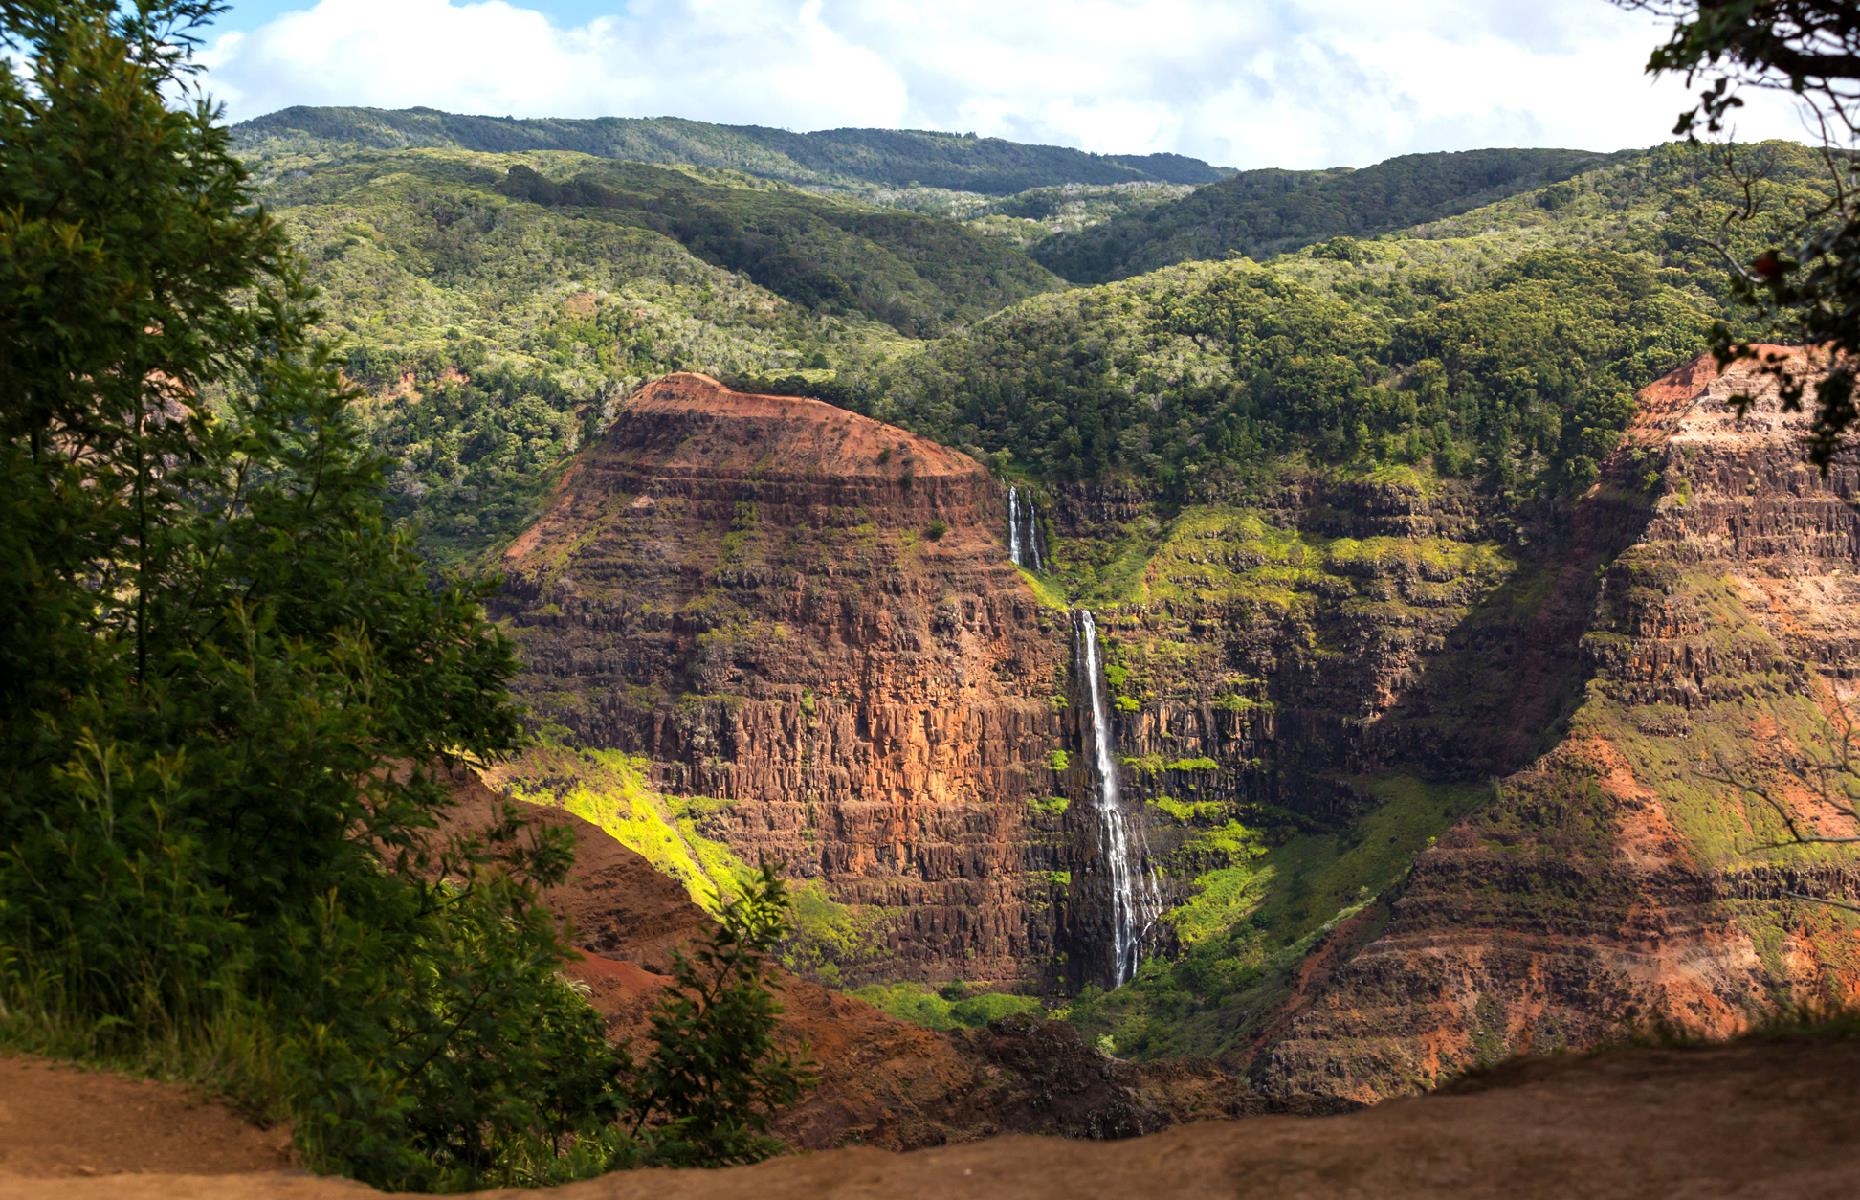 It's not hard to see why this mammoth canyon in Kauai has become known as the "Grand Canyon of the Pacific". It has the same rugged red rocks, waterfalls and hiking trails of its Arizona sister, and it plunges for more than 3,600 feet (1,097m). You'll get great views from the Waimea Canyon Lookout, or the Kalalau Lookout if you're up for a hike.